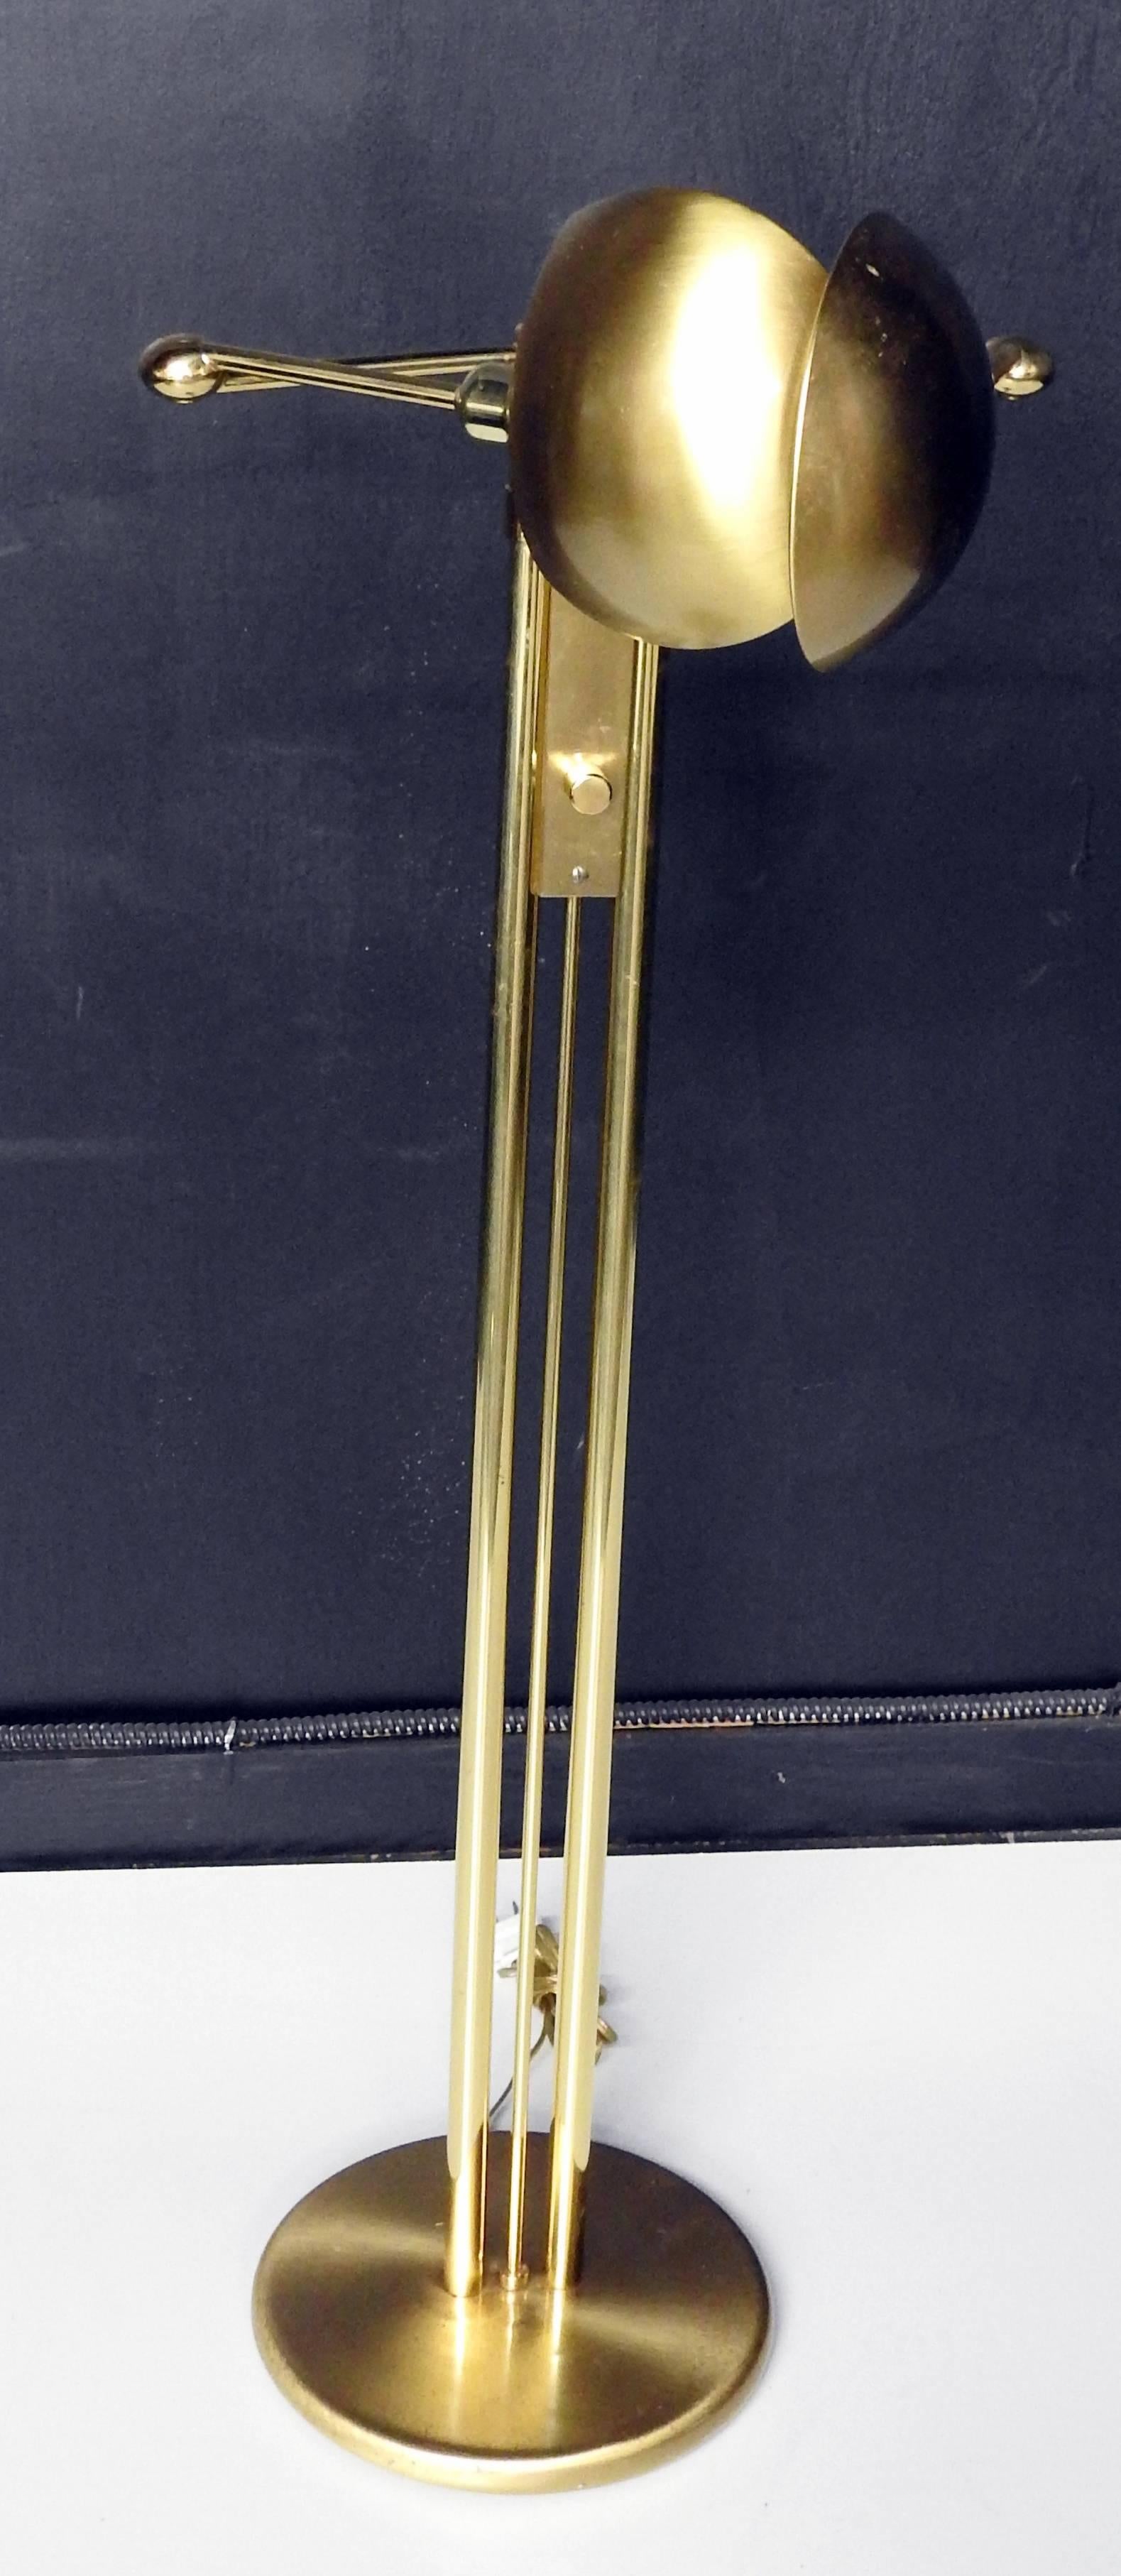 This pharmacy floor lamp has two swing arm lights for versatile lighting options. Pharmacy style arms are fully adjustable and dimmable. Antiqued brass finish on solid brass construction. Adjusts from 40